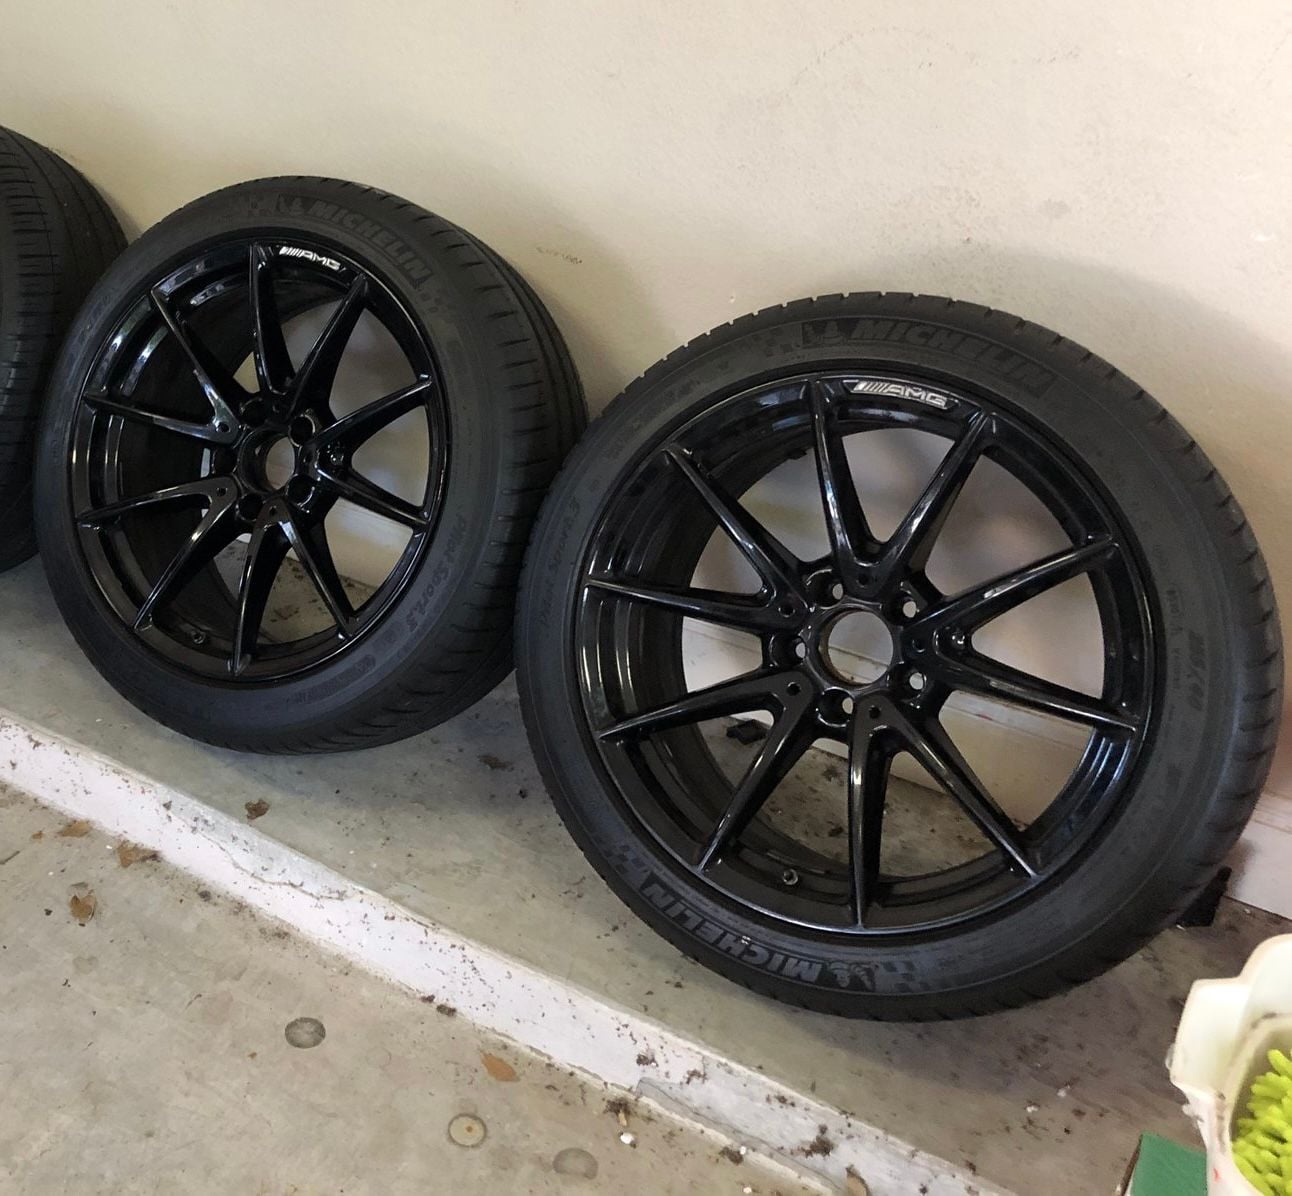 Wheels and Tires/Axles - W205 AMG C63 Coupe OEM 18” Wheels - Used - 2015 to 2021 Mercedes-Benz C63 AMG - 2015 to 2021 Mercedes-Benz C63 AMG S - Austin, TX 78746, United States